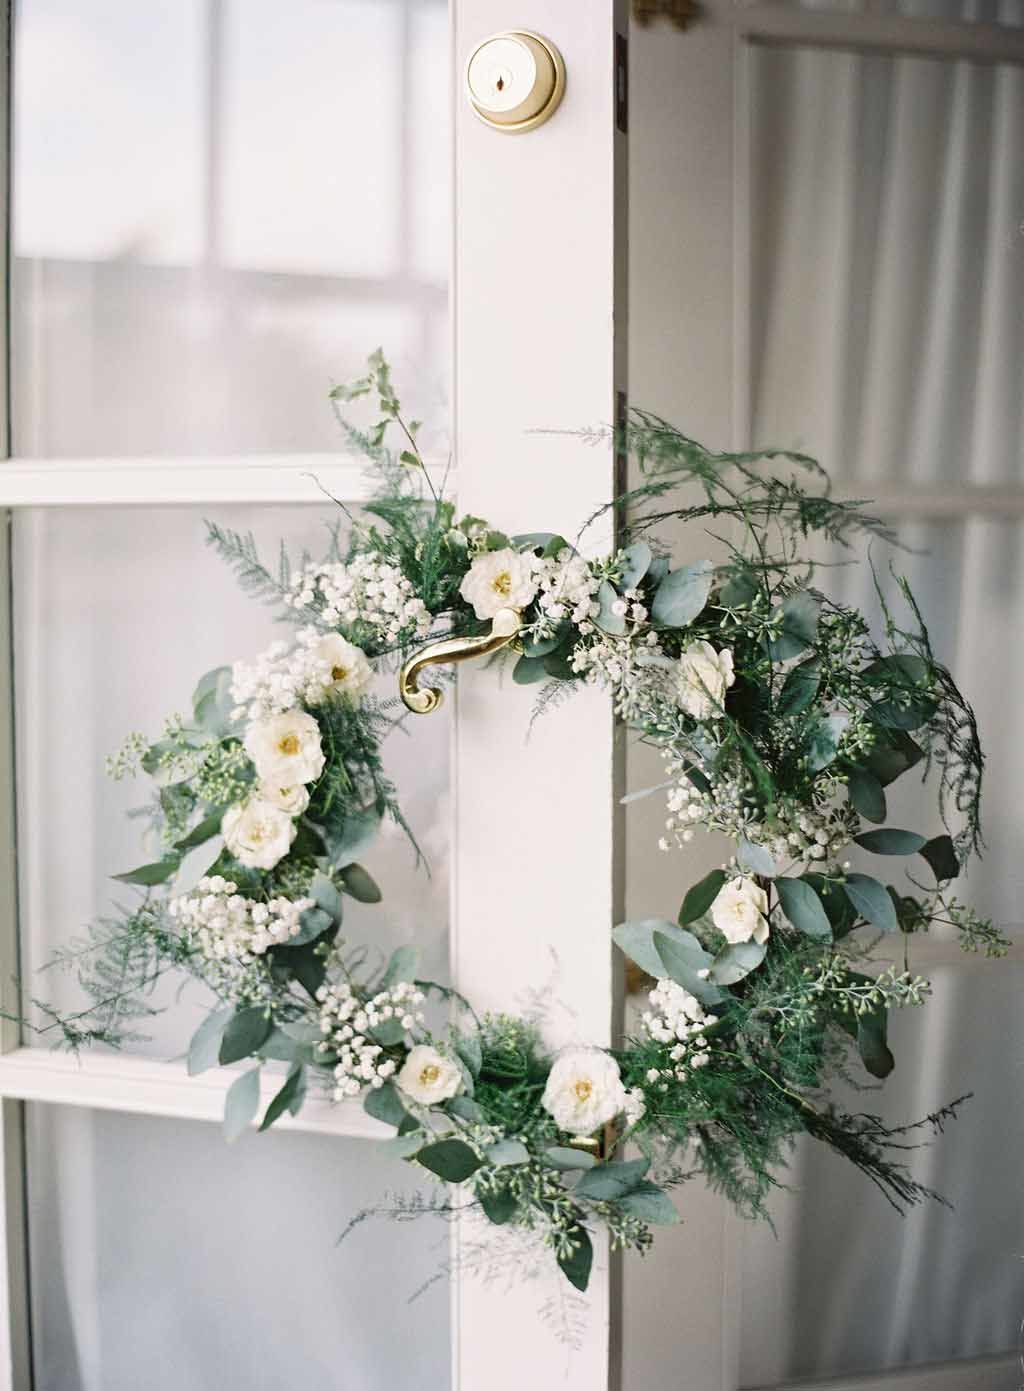 greenery floral crown with white roses hanging on door knob